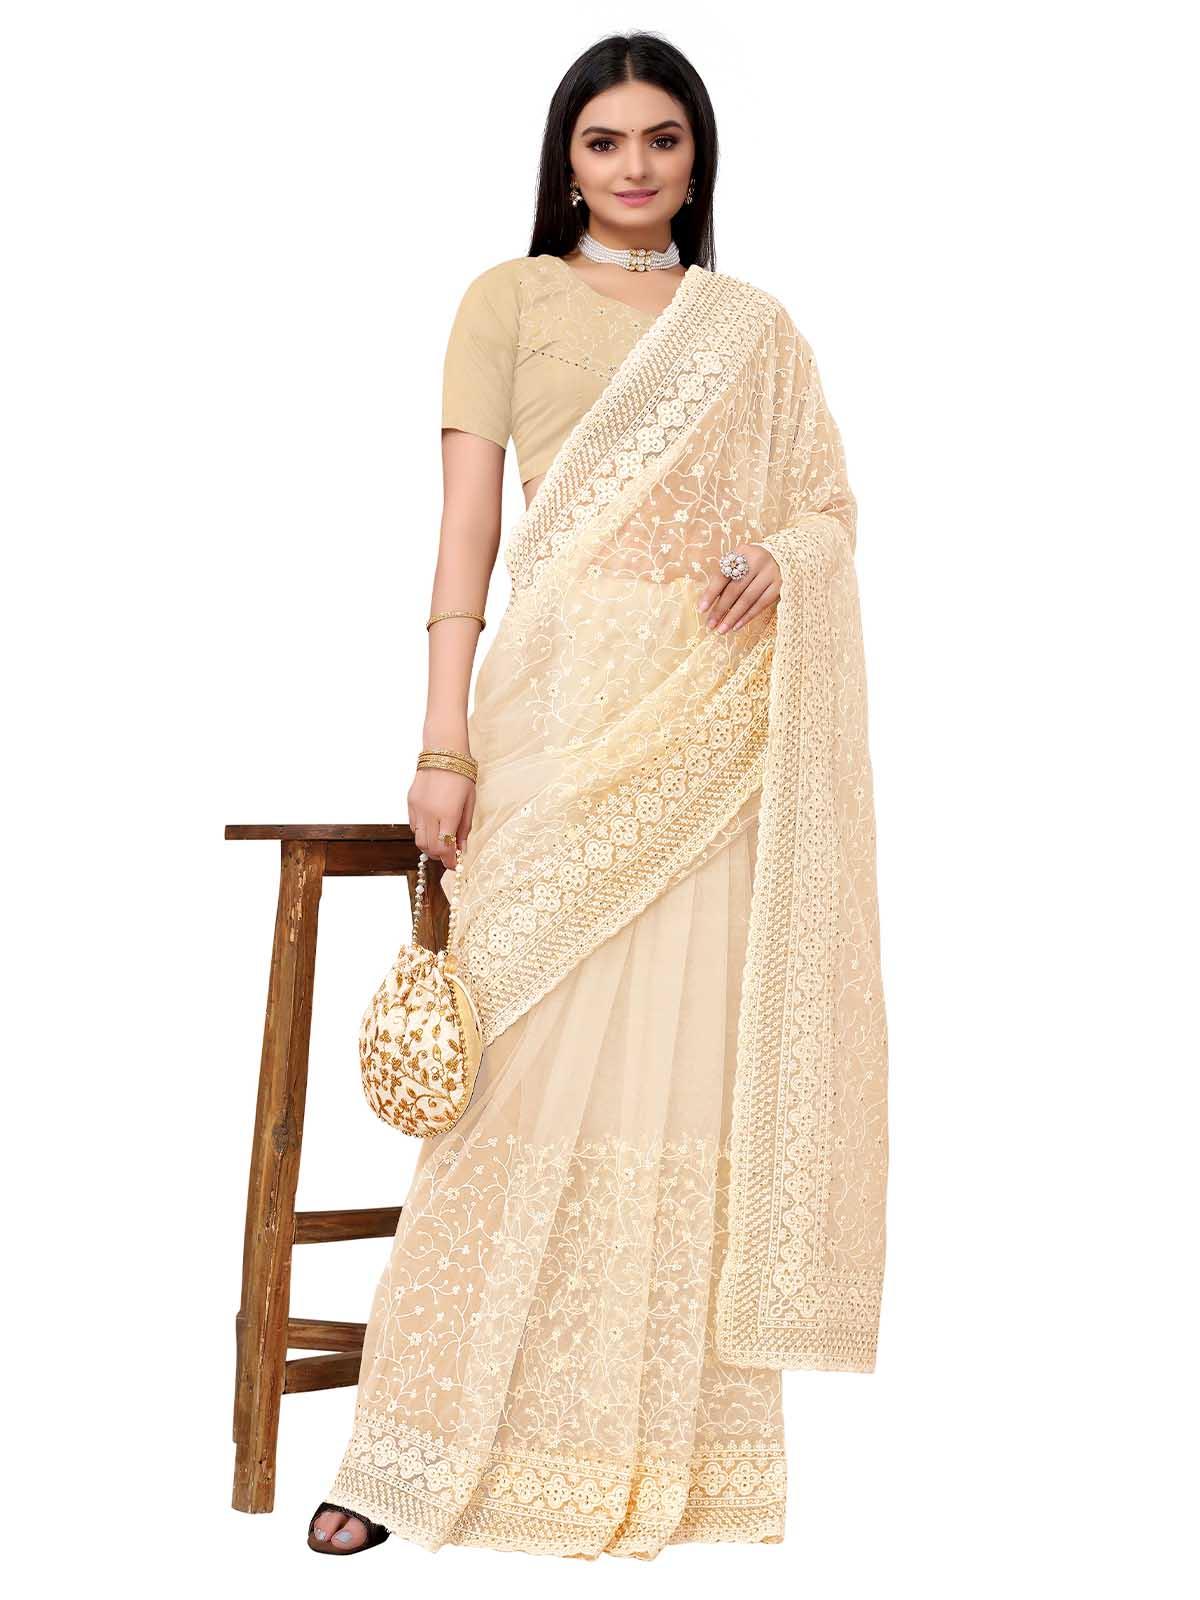 Women's Apricot Net Embroidered Saree With Blouse - Odette